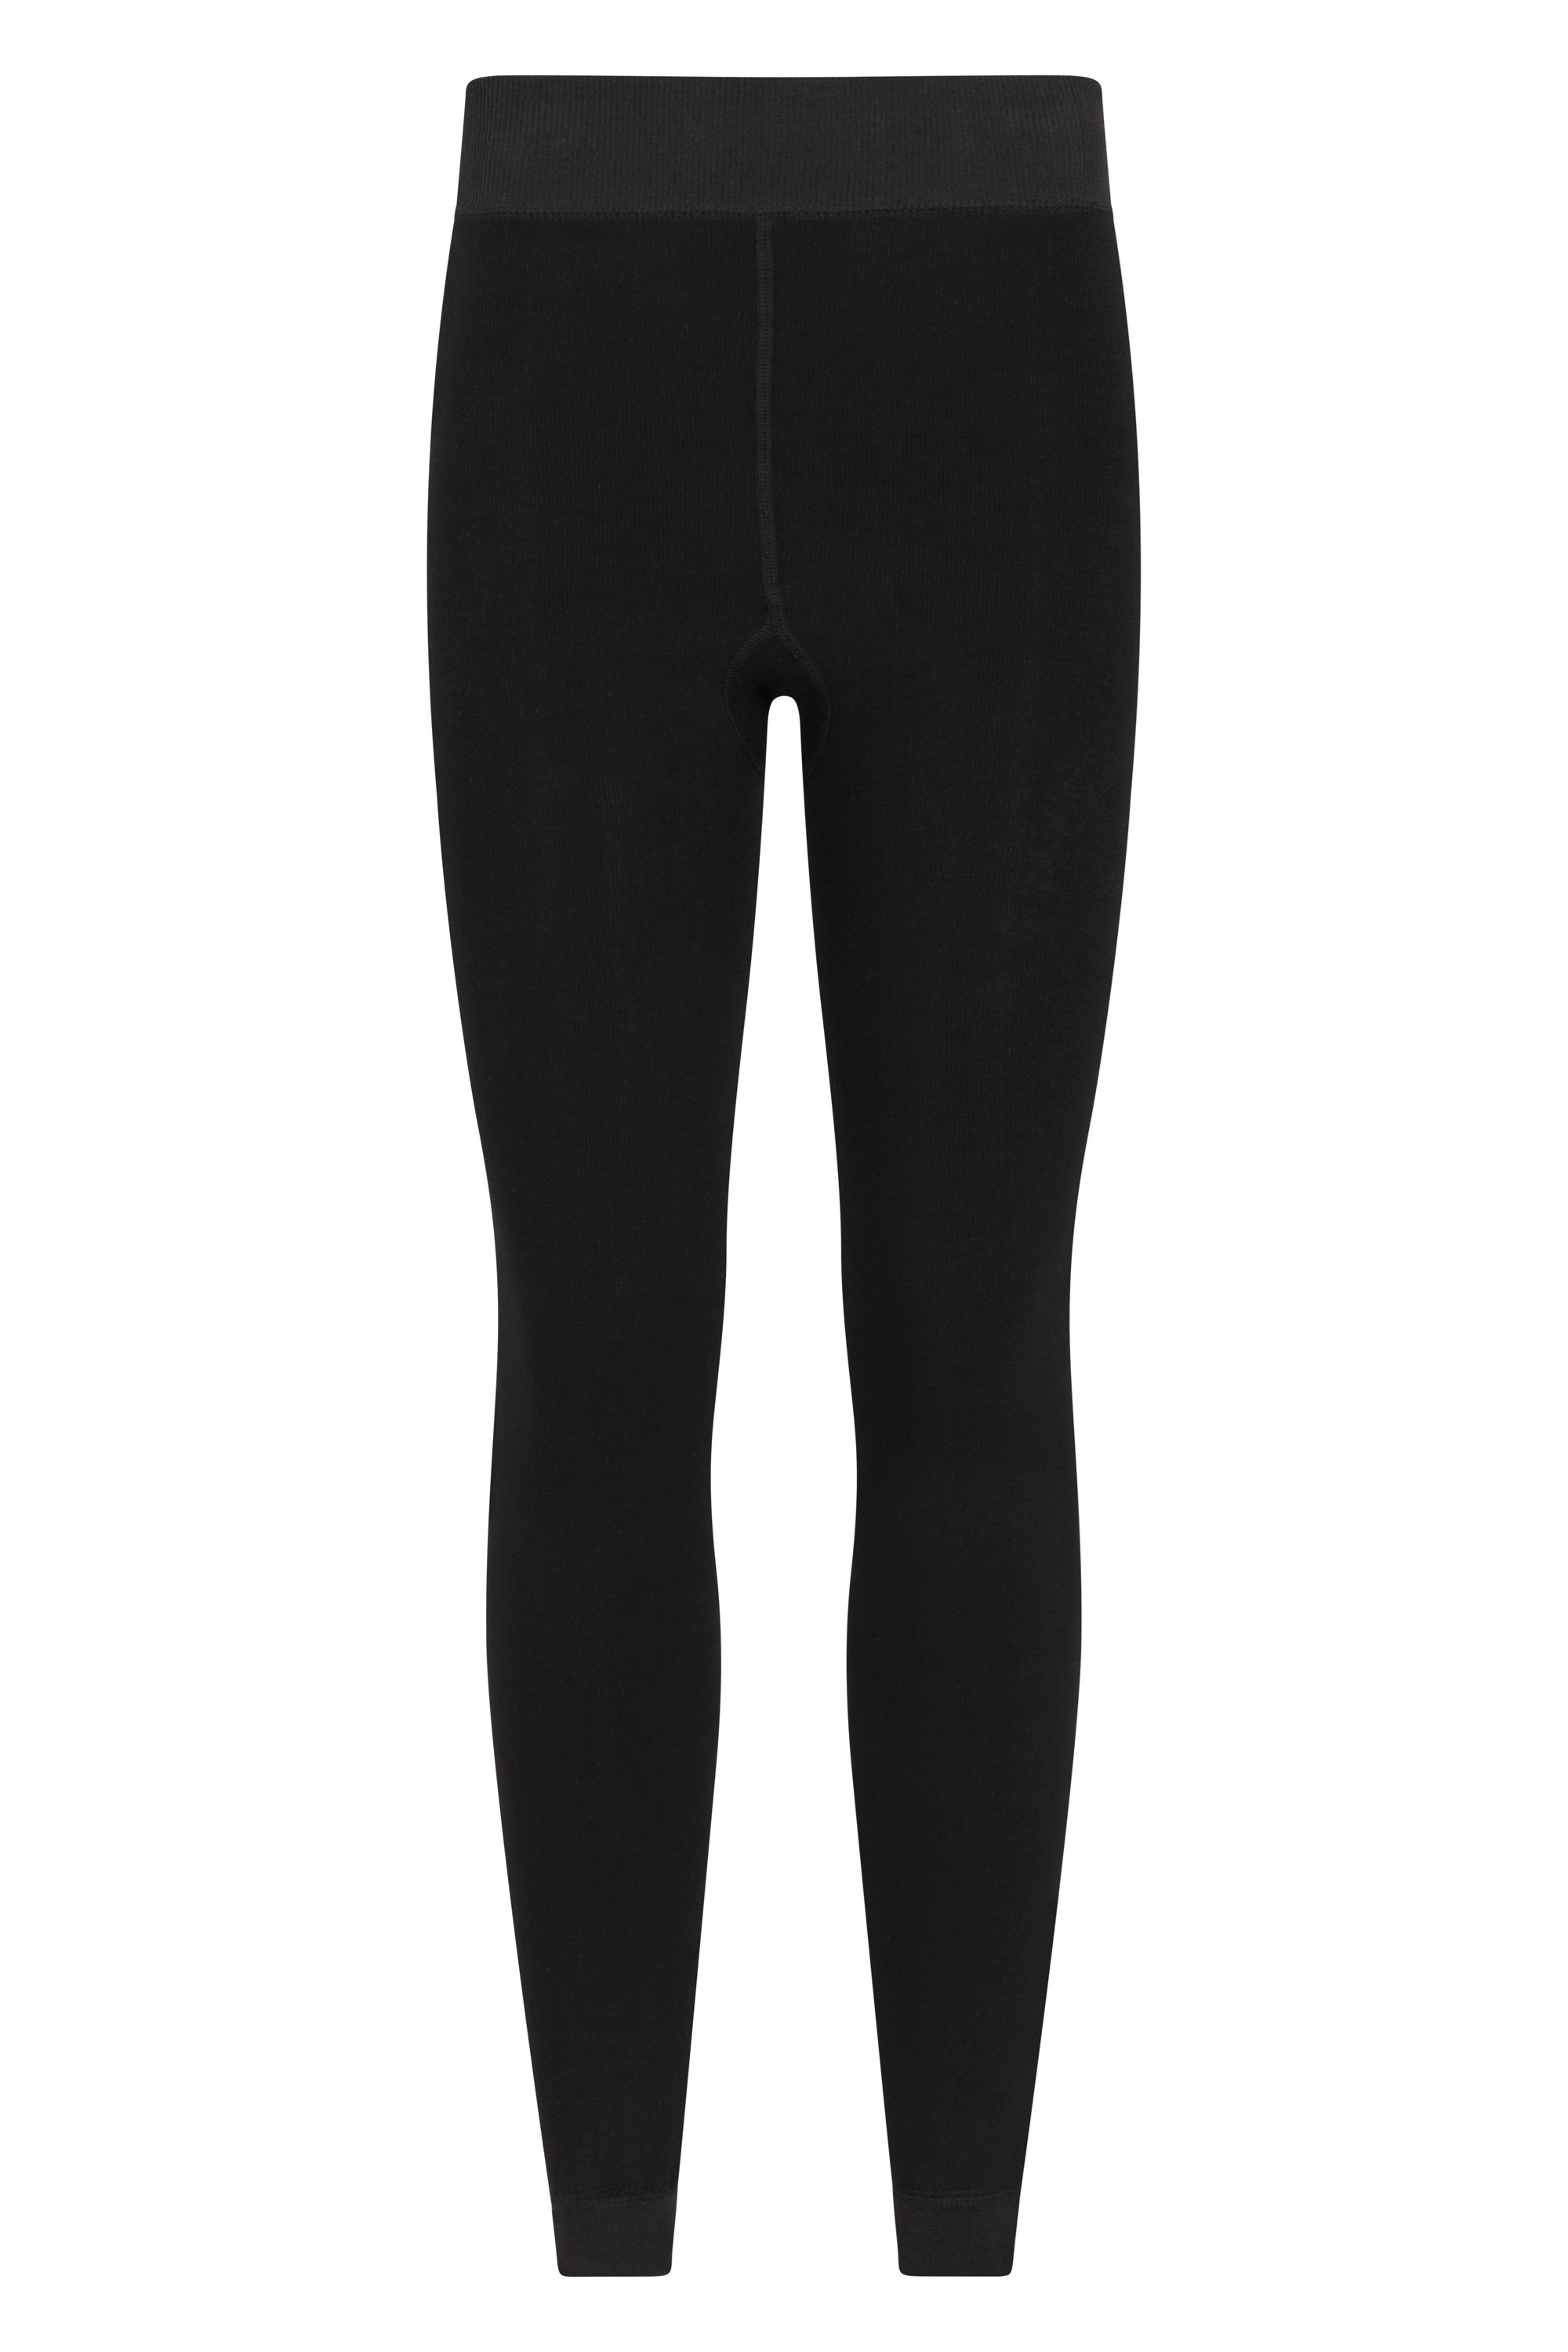 s £13 thermal leggings are 'soft and warm' and 'keep the